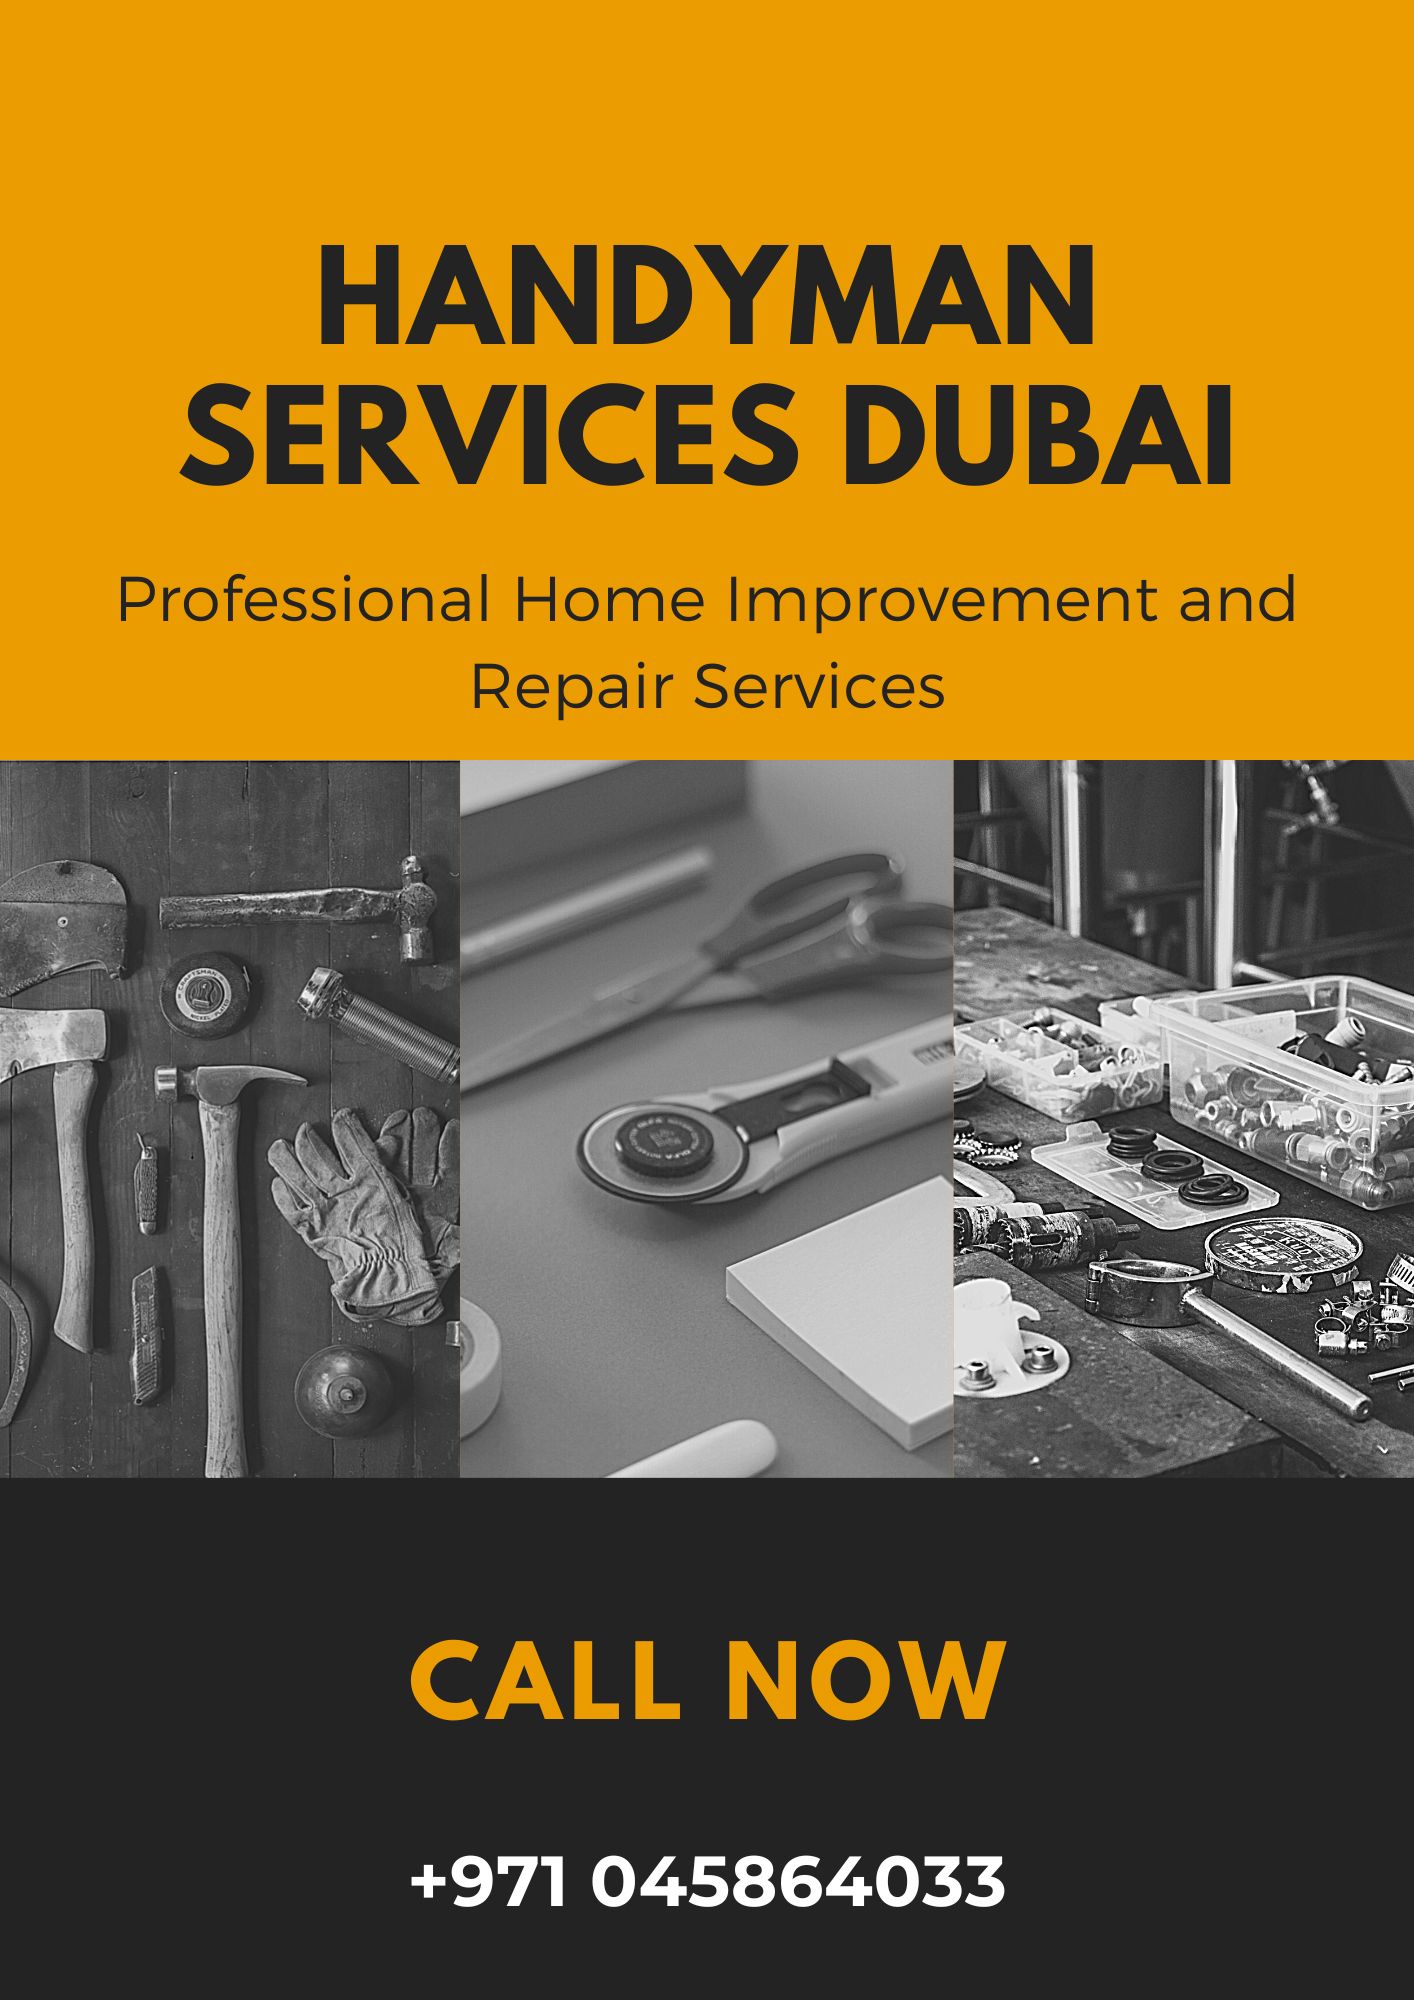 What is a professional handyman Dubai and what is their contact number?